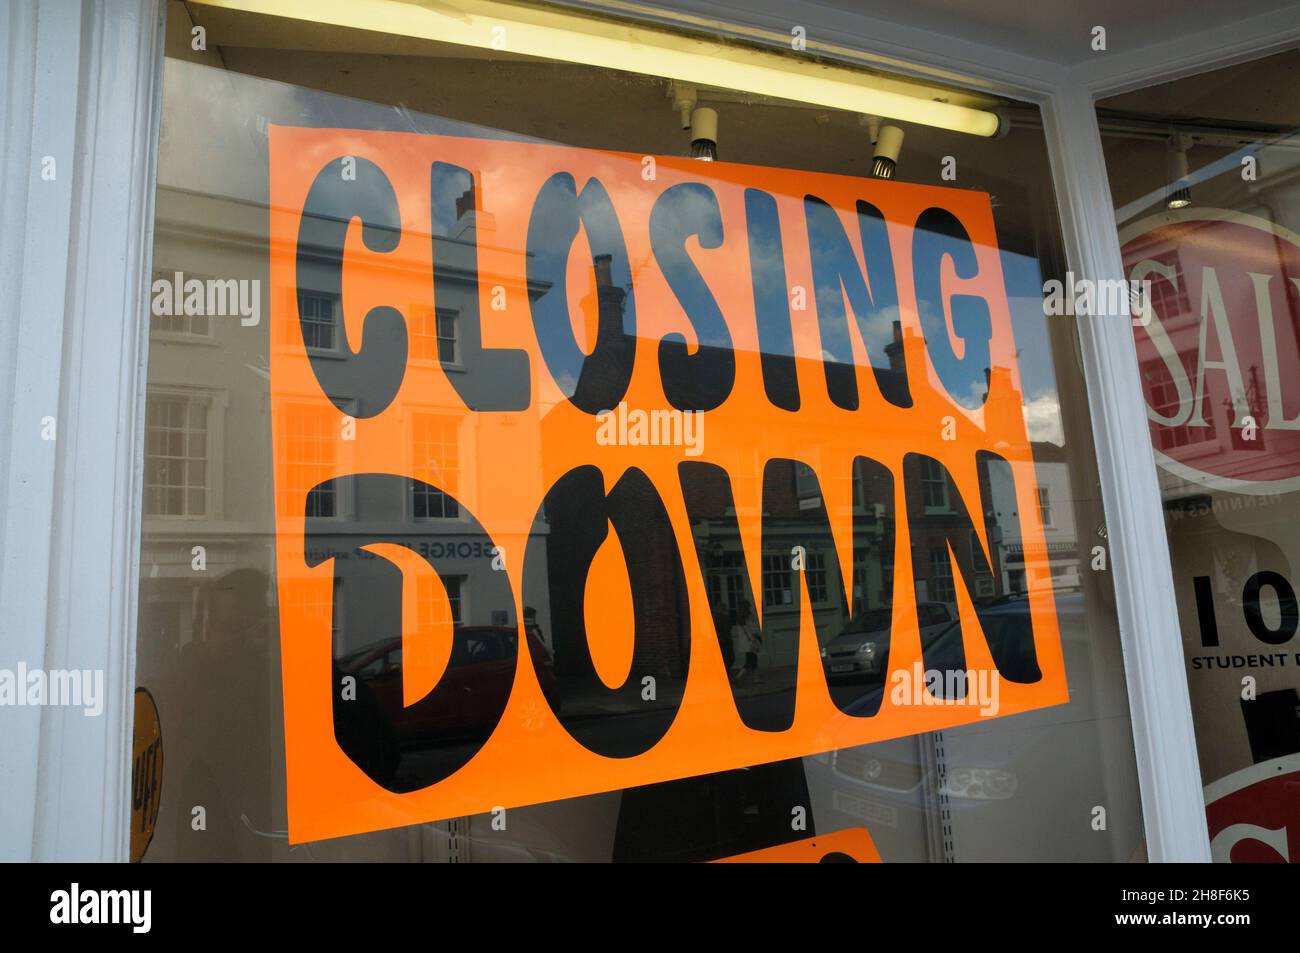 Closing down sign in shop window. Stock Photo